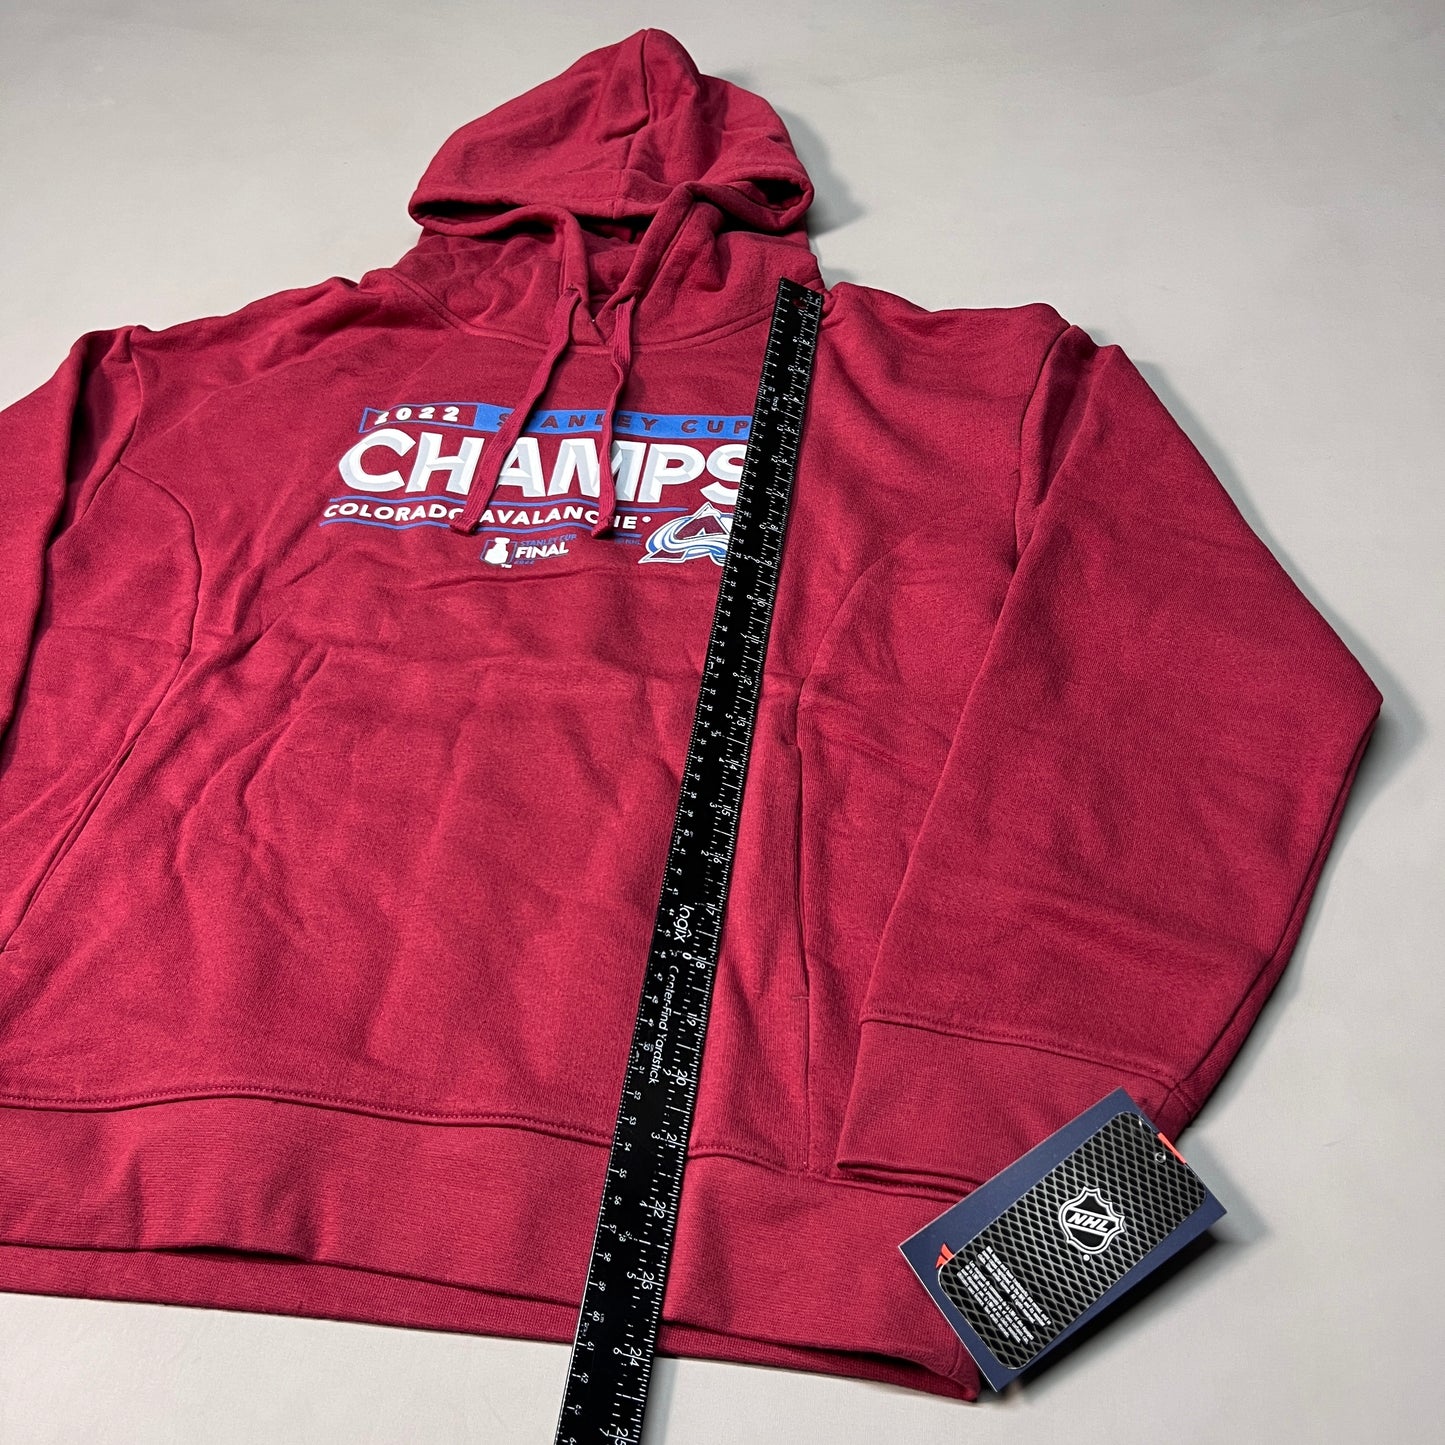 FANATICS 2022 Stanley Cup Champs Colorado Avalanche Final Hoodie Sz S Burgundy 22NHL0024 (New)